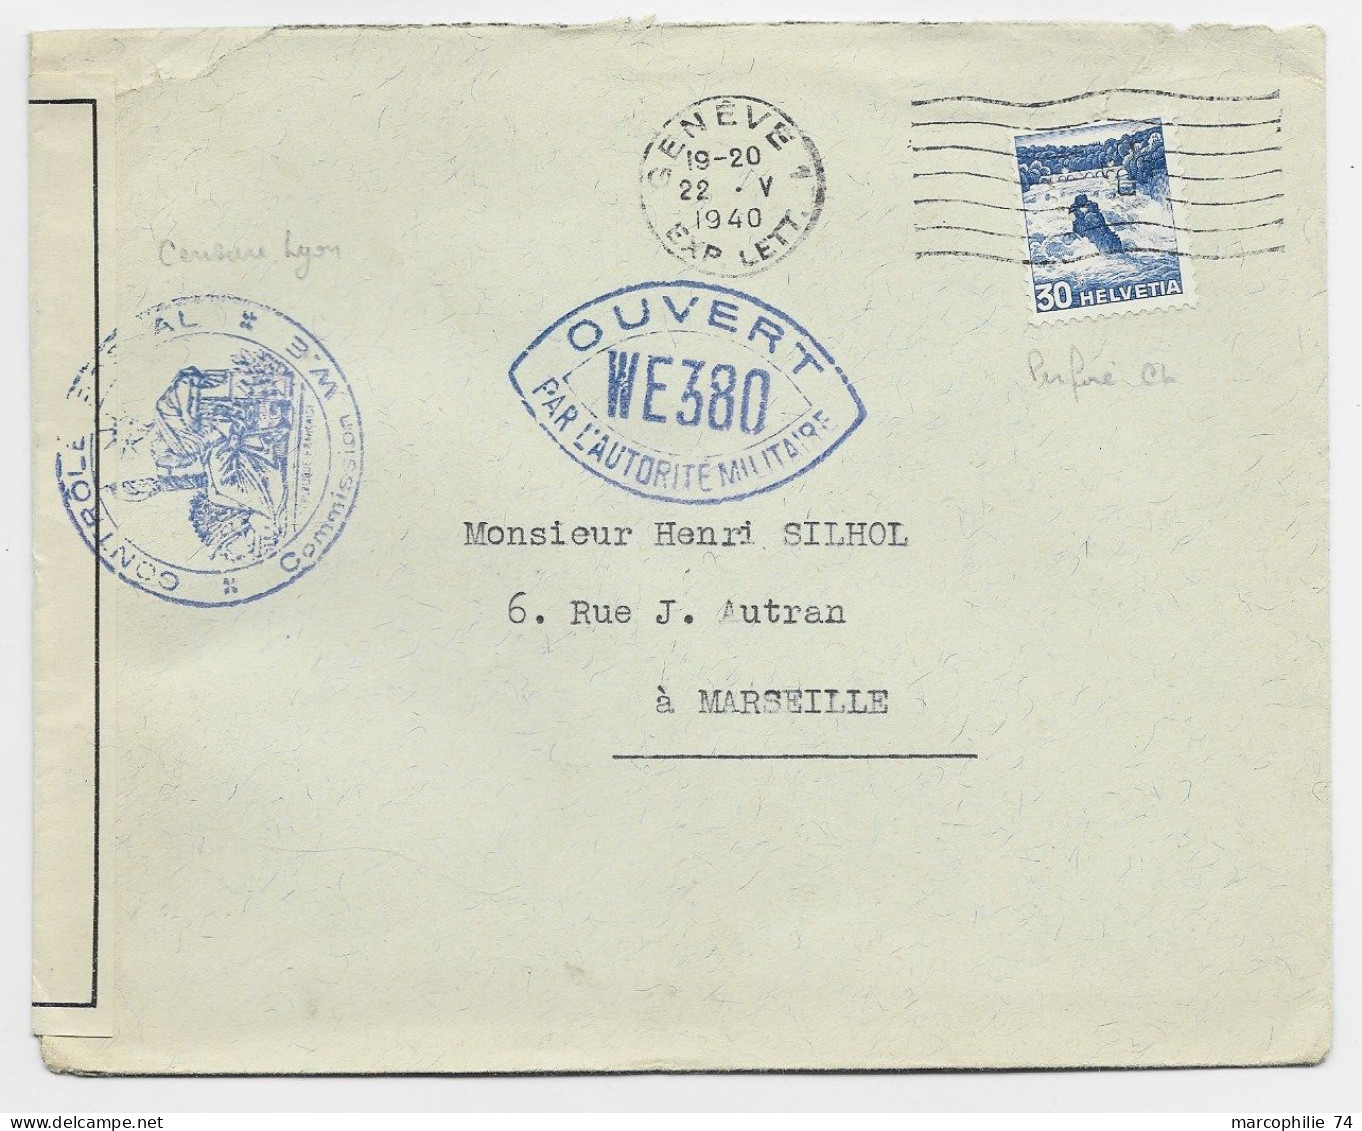 SUISSE HELVETIA 30C PERFIN PERFORE C.L. LETTRE COVER MEC GENEVE 22.V.1940 TO FRANCE CENSURE OUVERT WE 380 - Perforadas